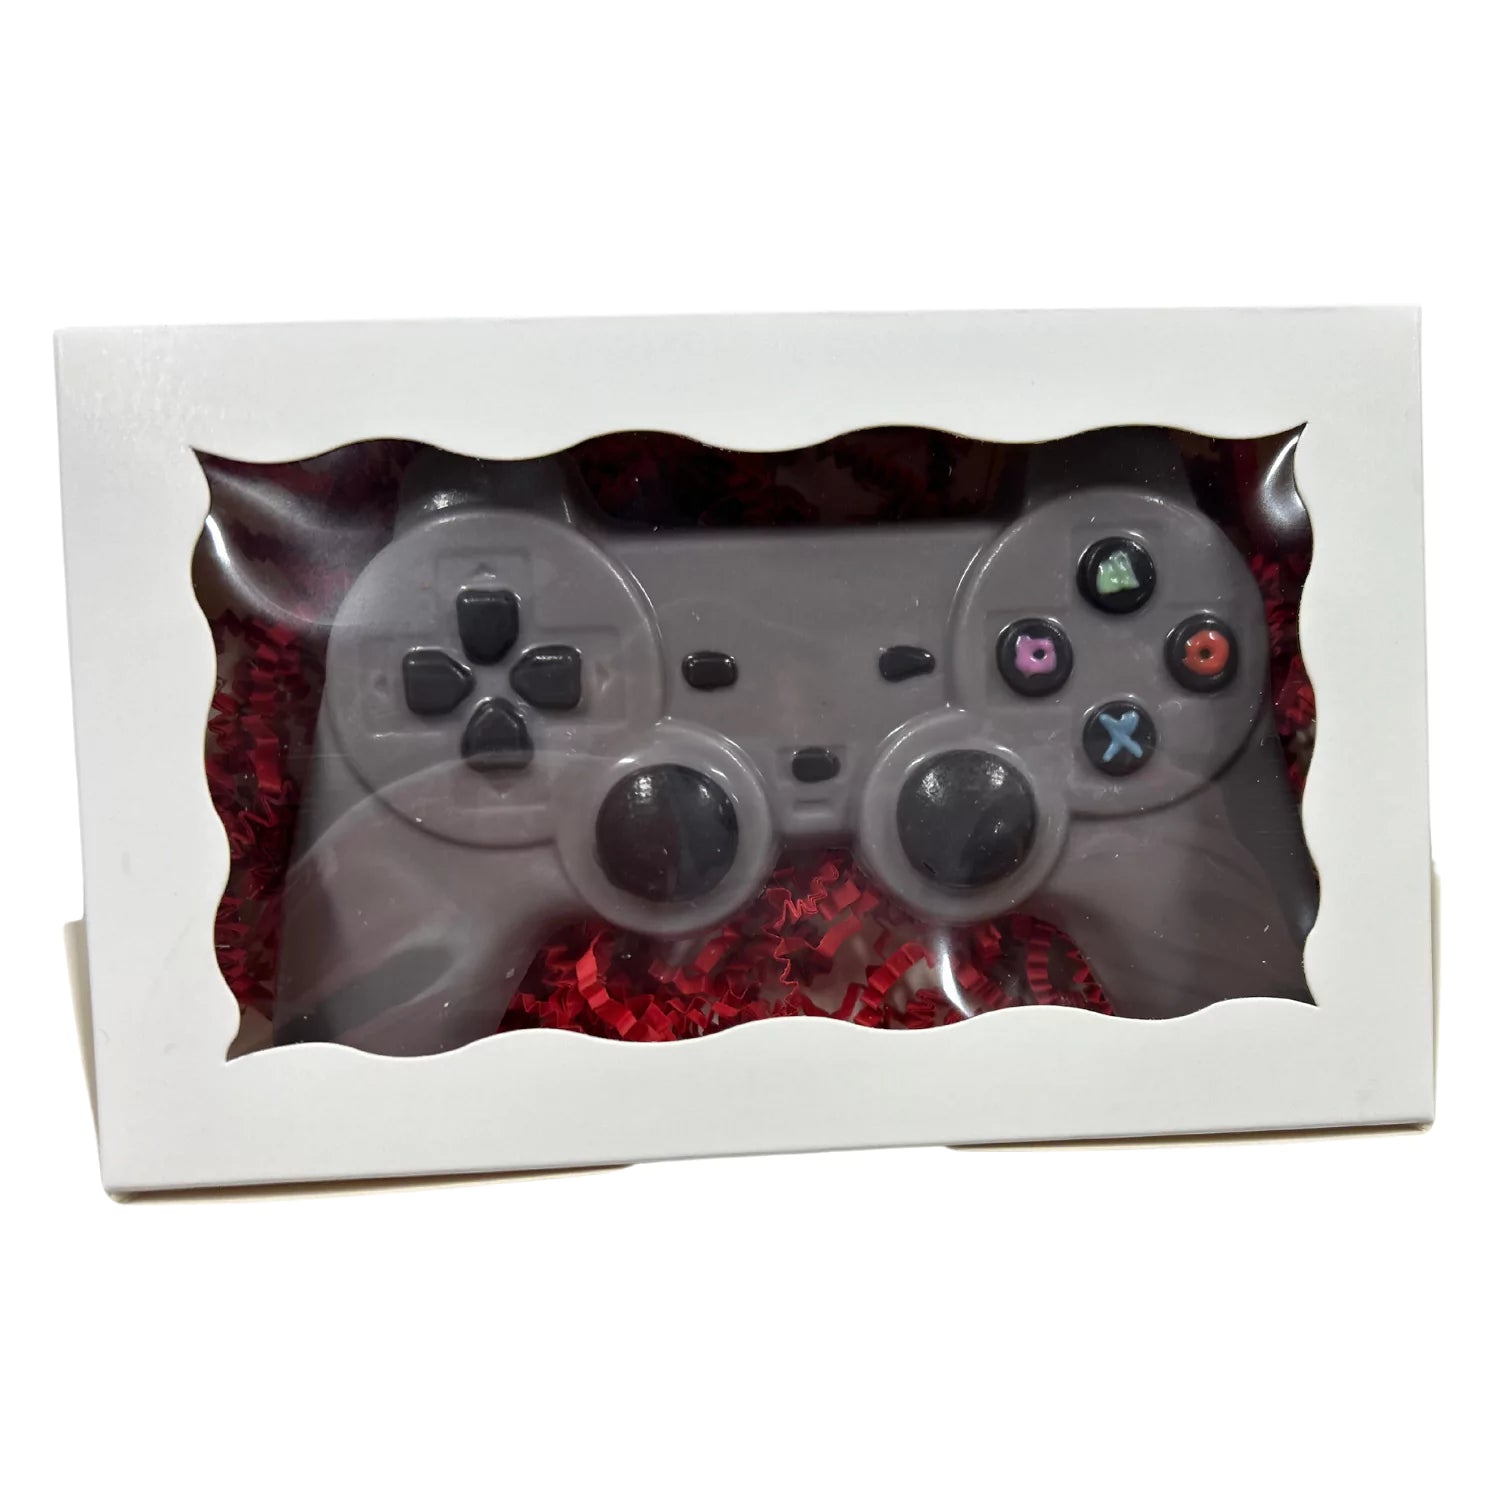 Playstation Controller White and Milk Chocolate Treat Box Set 4.5oz